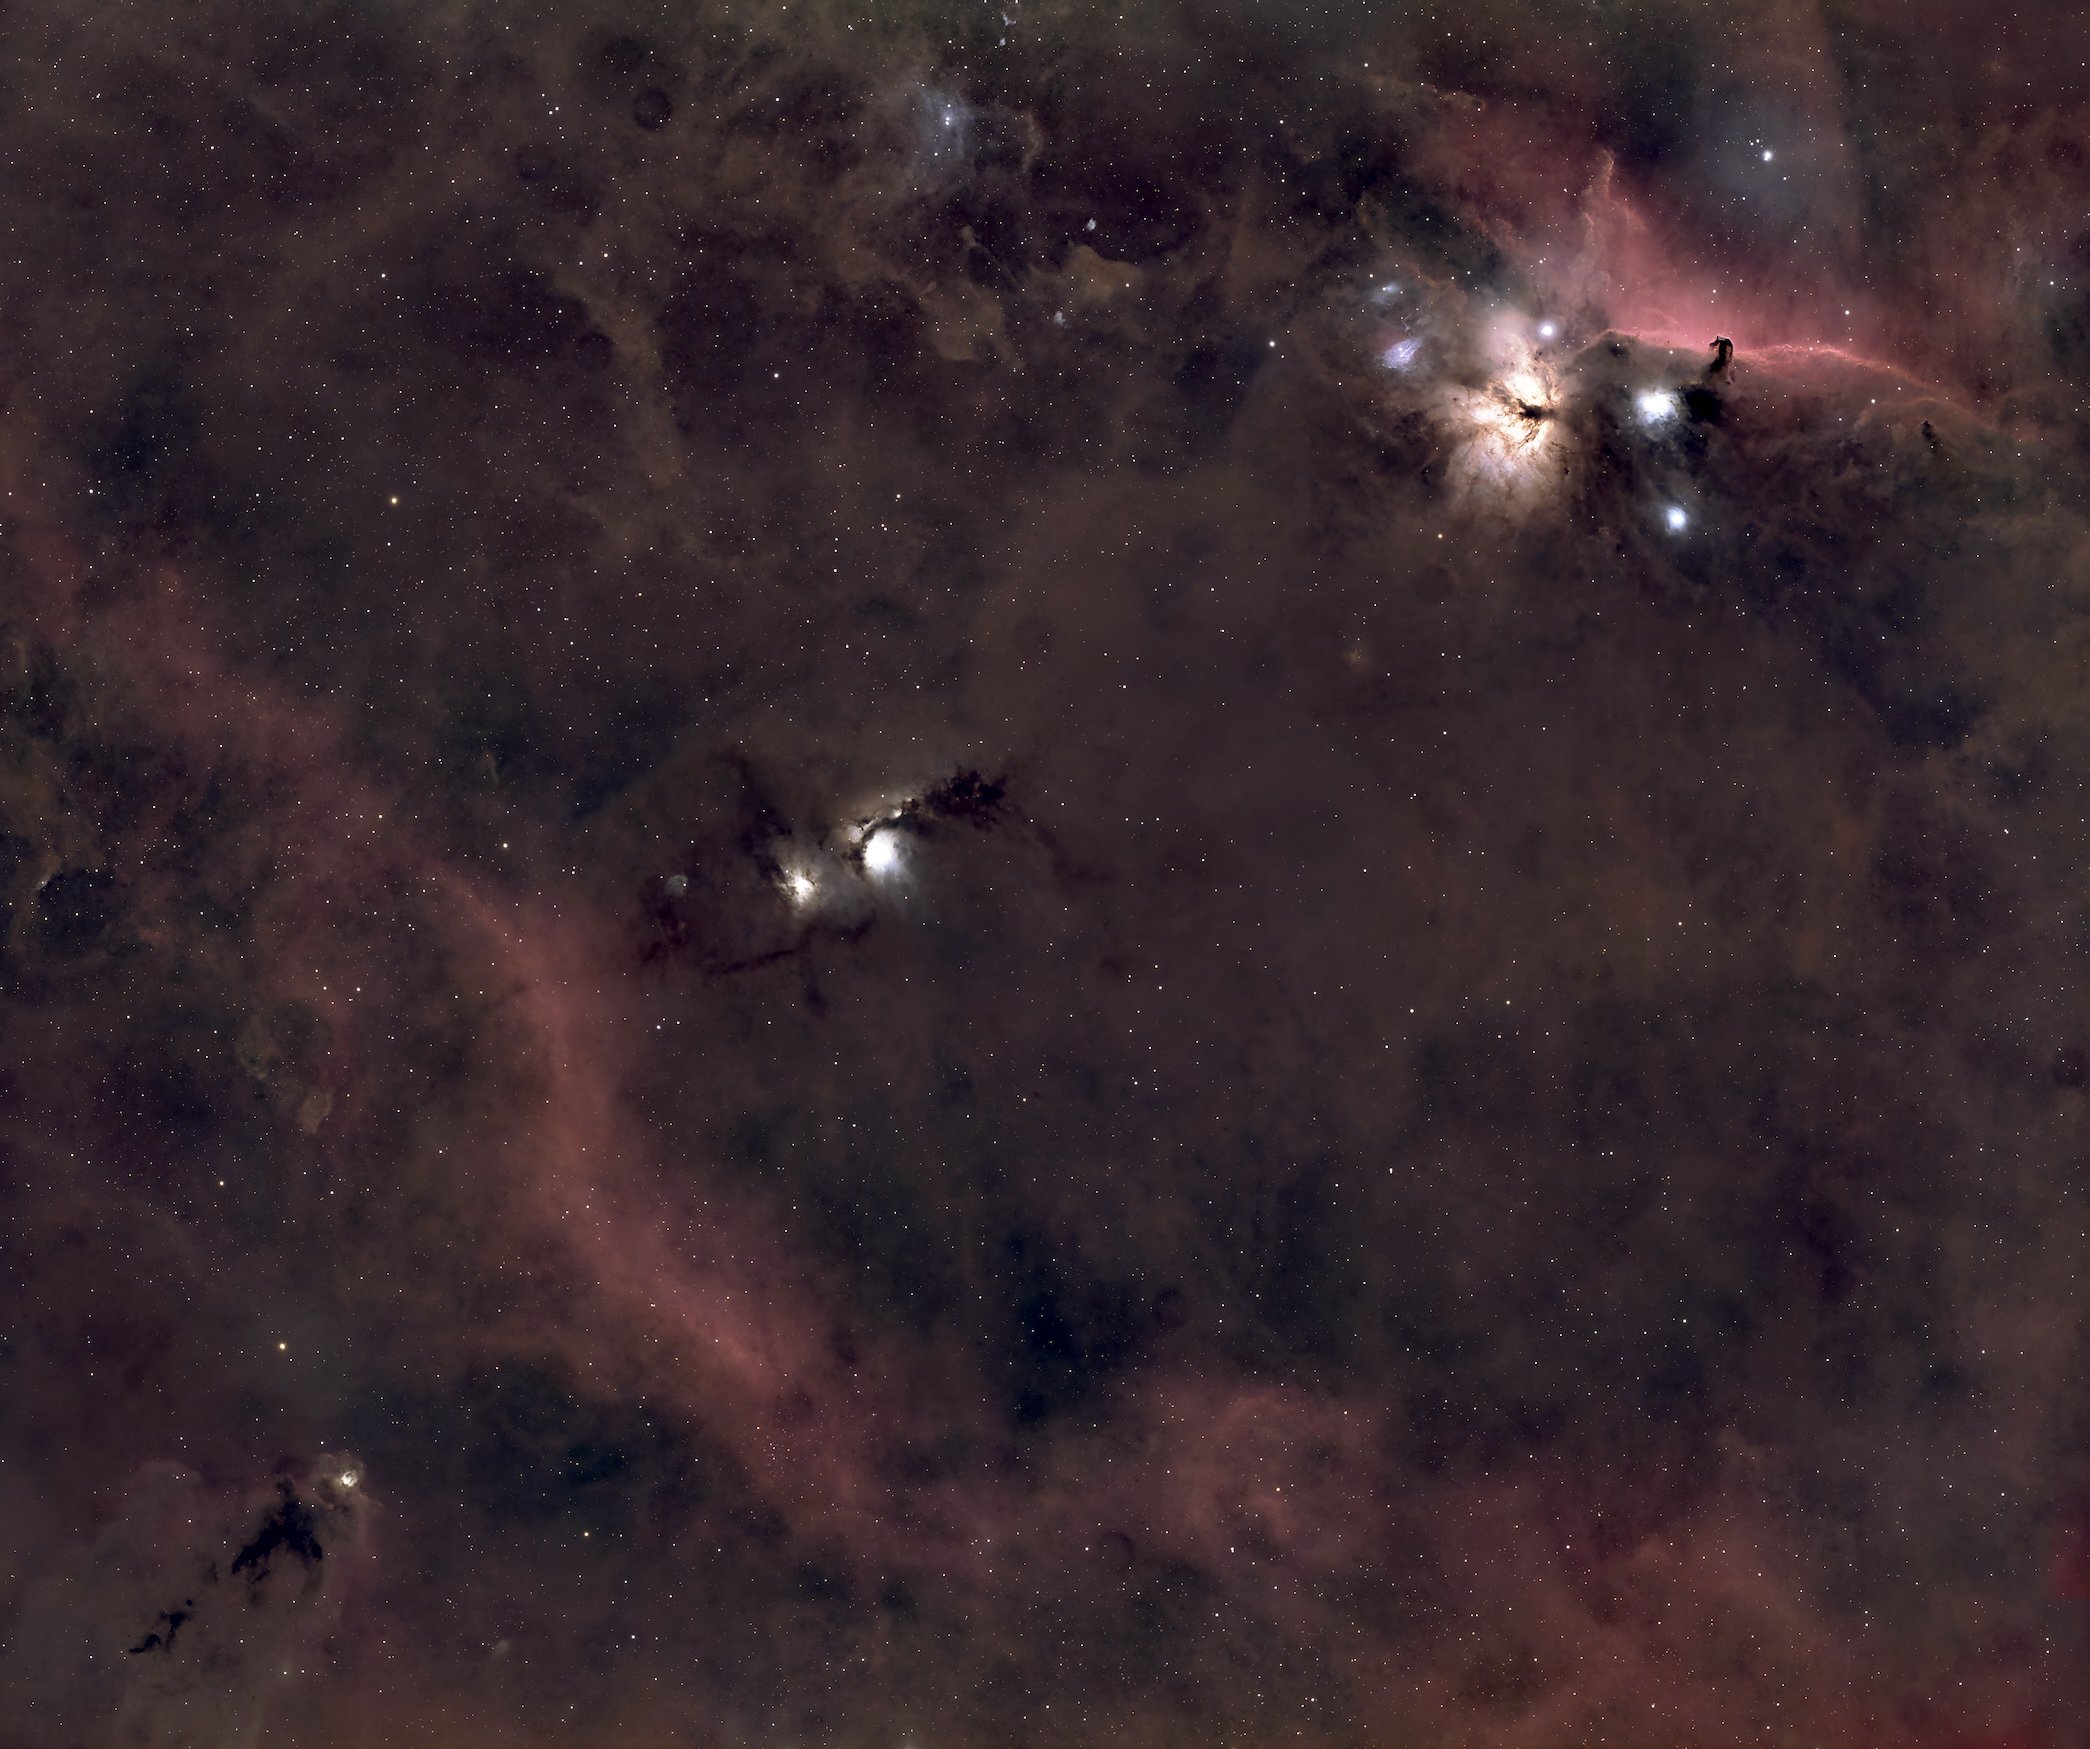 A wide view of Orion with Flame and Horsehead, M78, the Boogeyman, and part of Barnard's loop